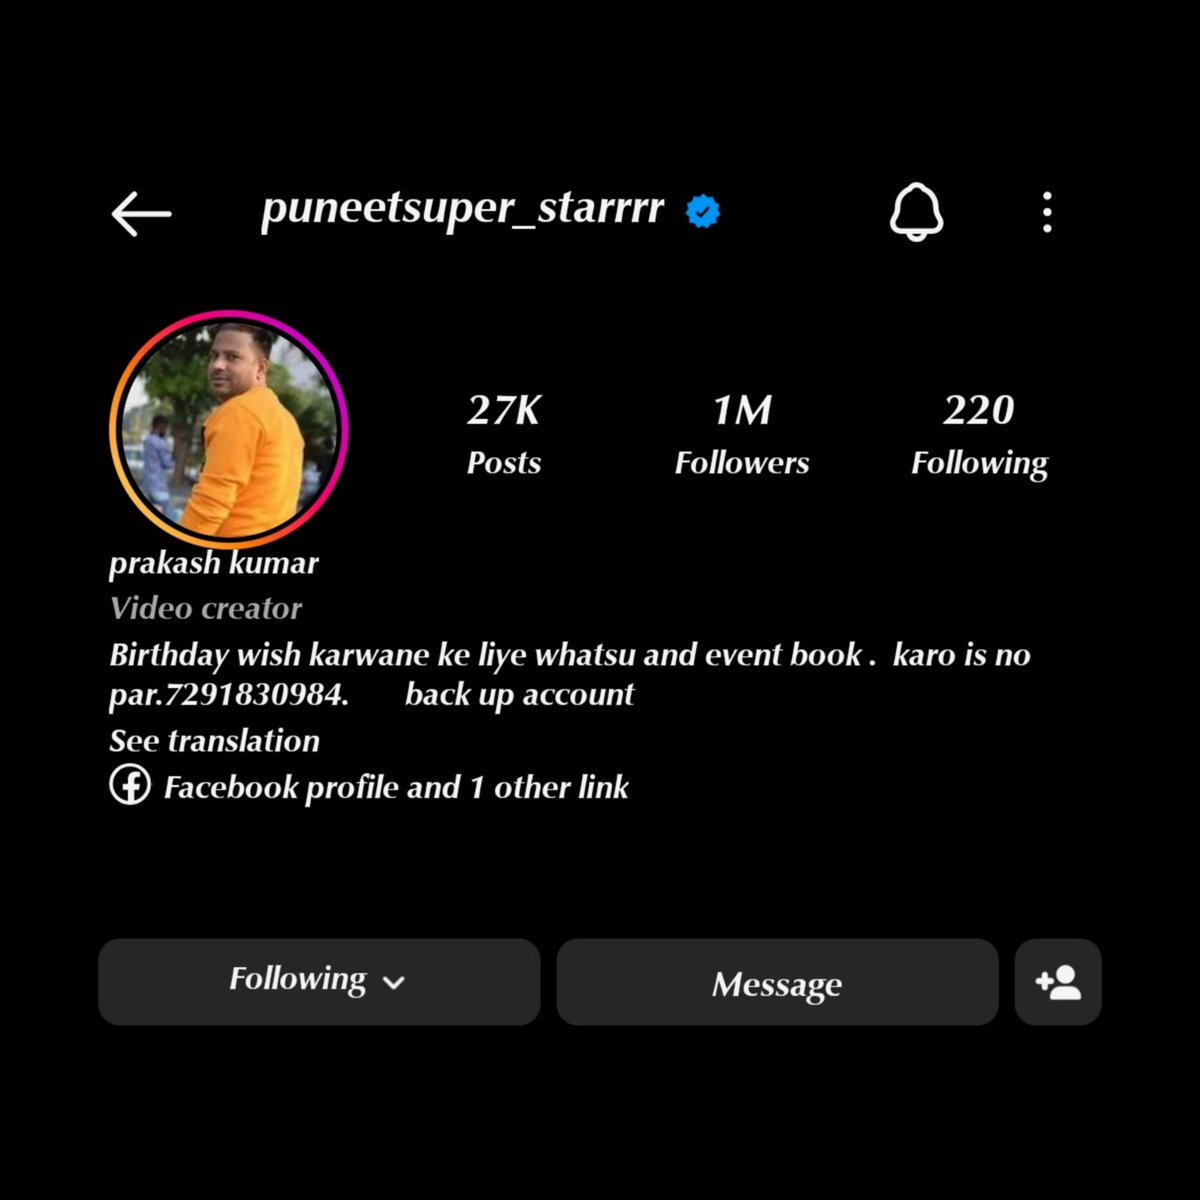 Kyu bola tha na famous hokar dekha dunga 🫡🔥

He was right he Gained 525K followers in
just 3 days UNREAL craze for our 
#LordPuneet 👑

#PuneetSuperstar #PuneetArmy